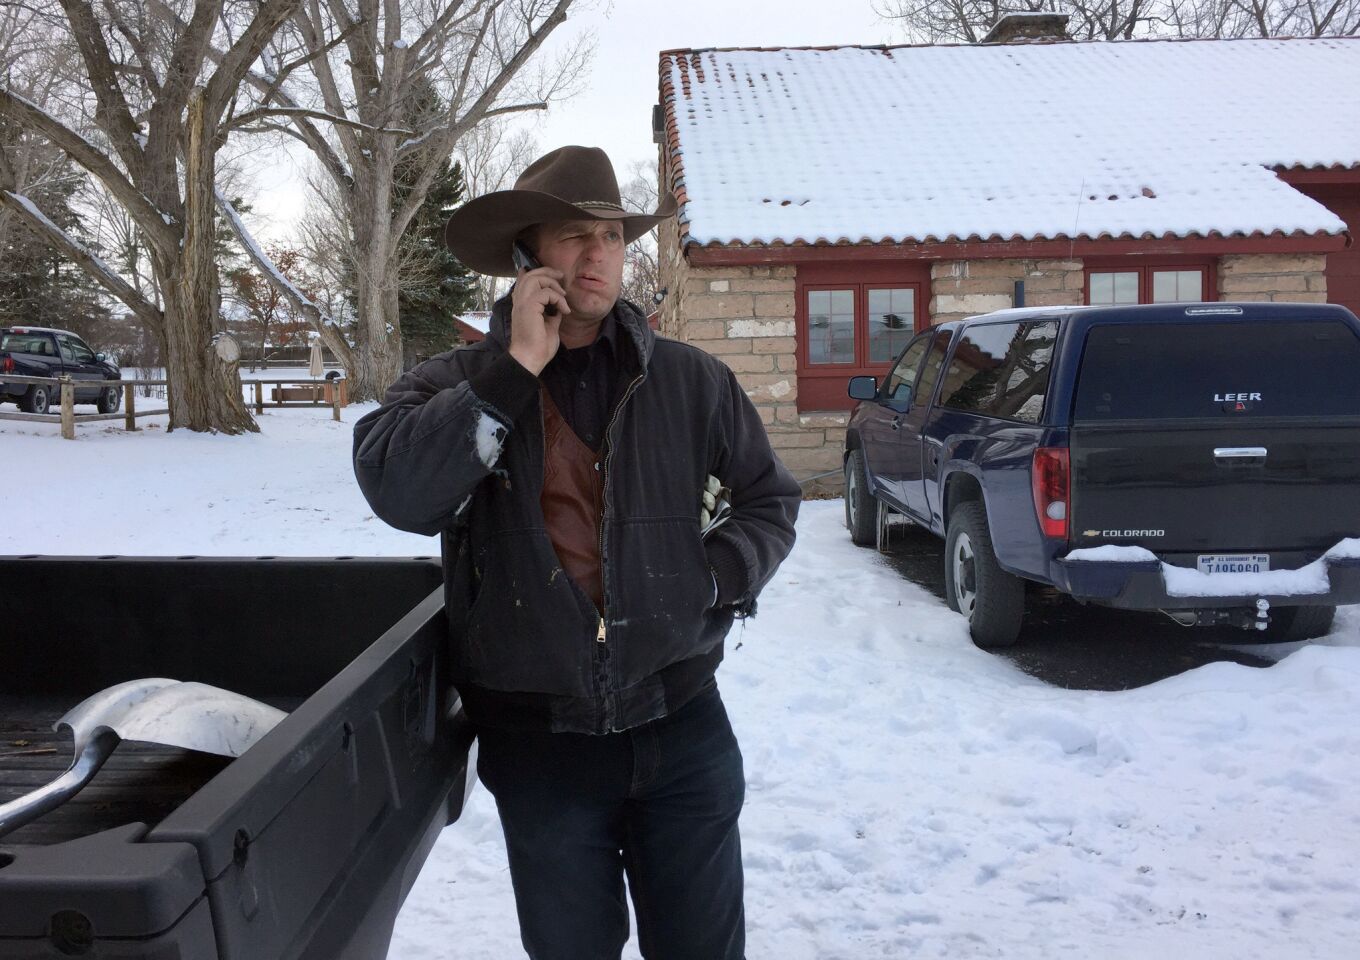 Ryan Bundy talks on the phone at the Malheur National Wildlife Refuge near Burns, Ore. on Sunday. Bundy, son of Nevada rancher Cliven Bundy, is one of the people occupying the refuge.